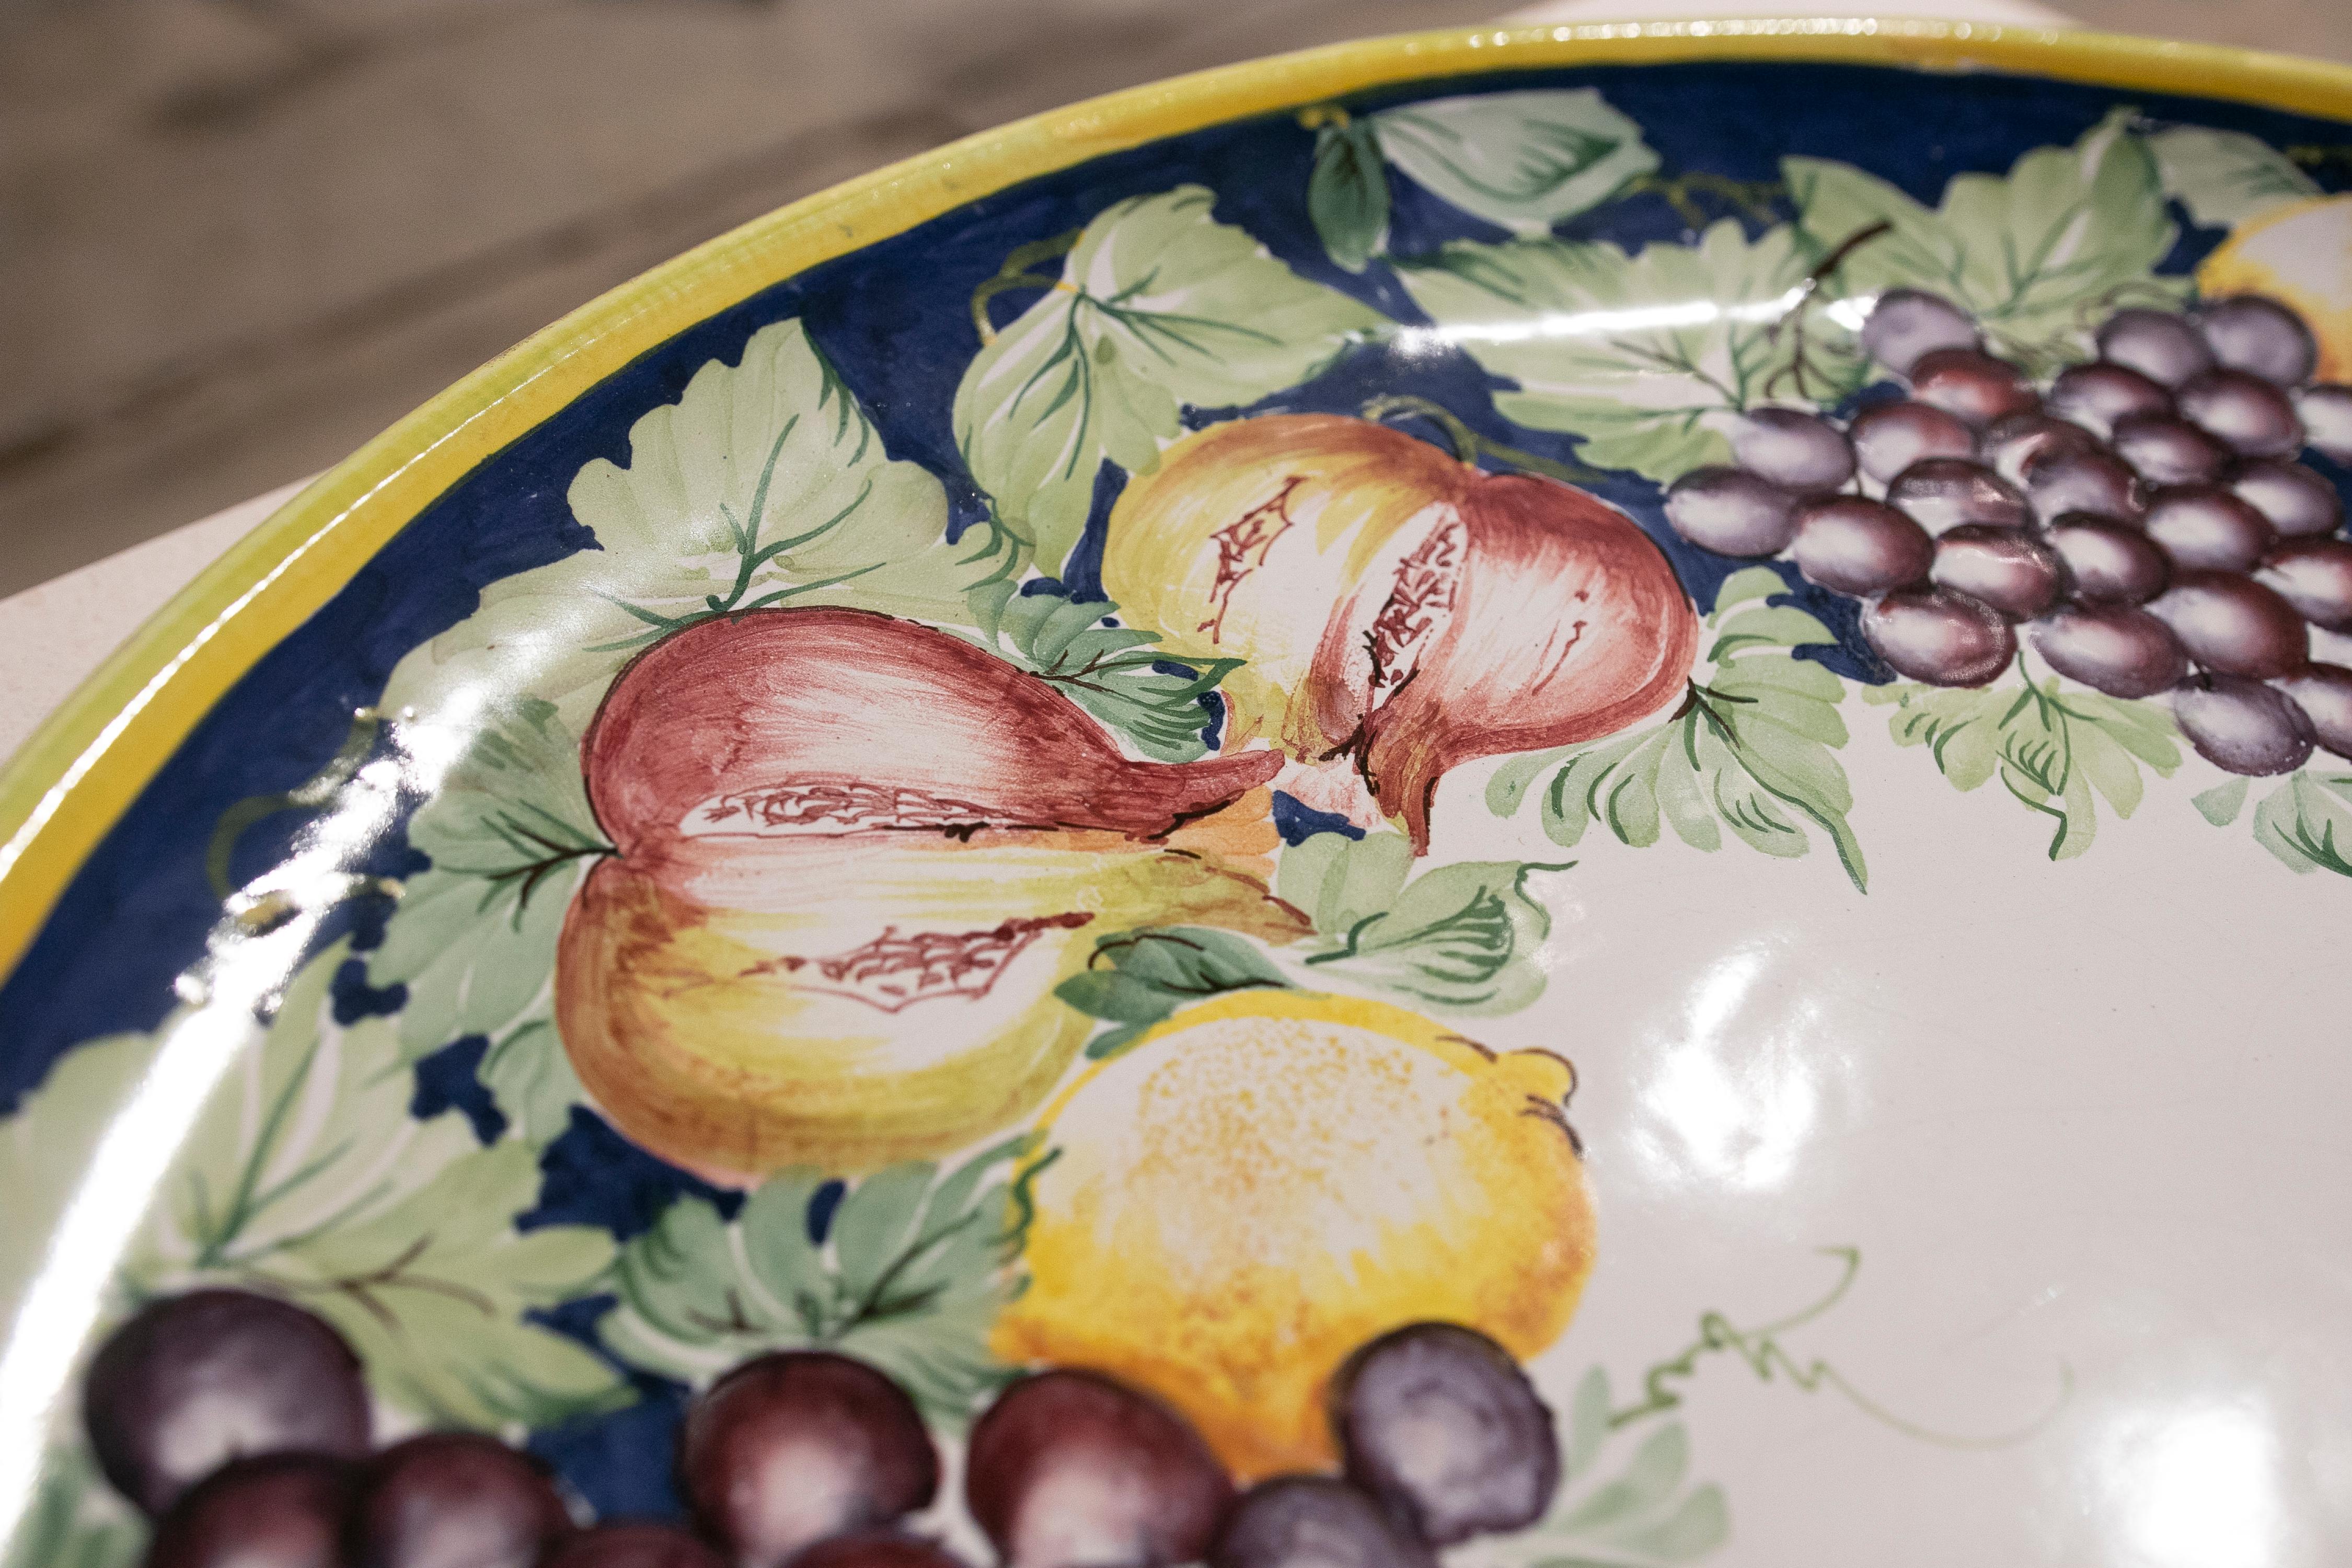 Italian Hand Painted Glazed Ceramic Dish with Fruits and Leaves 1